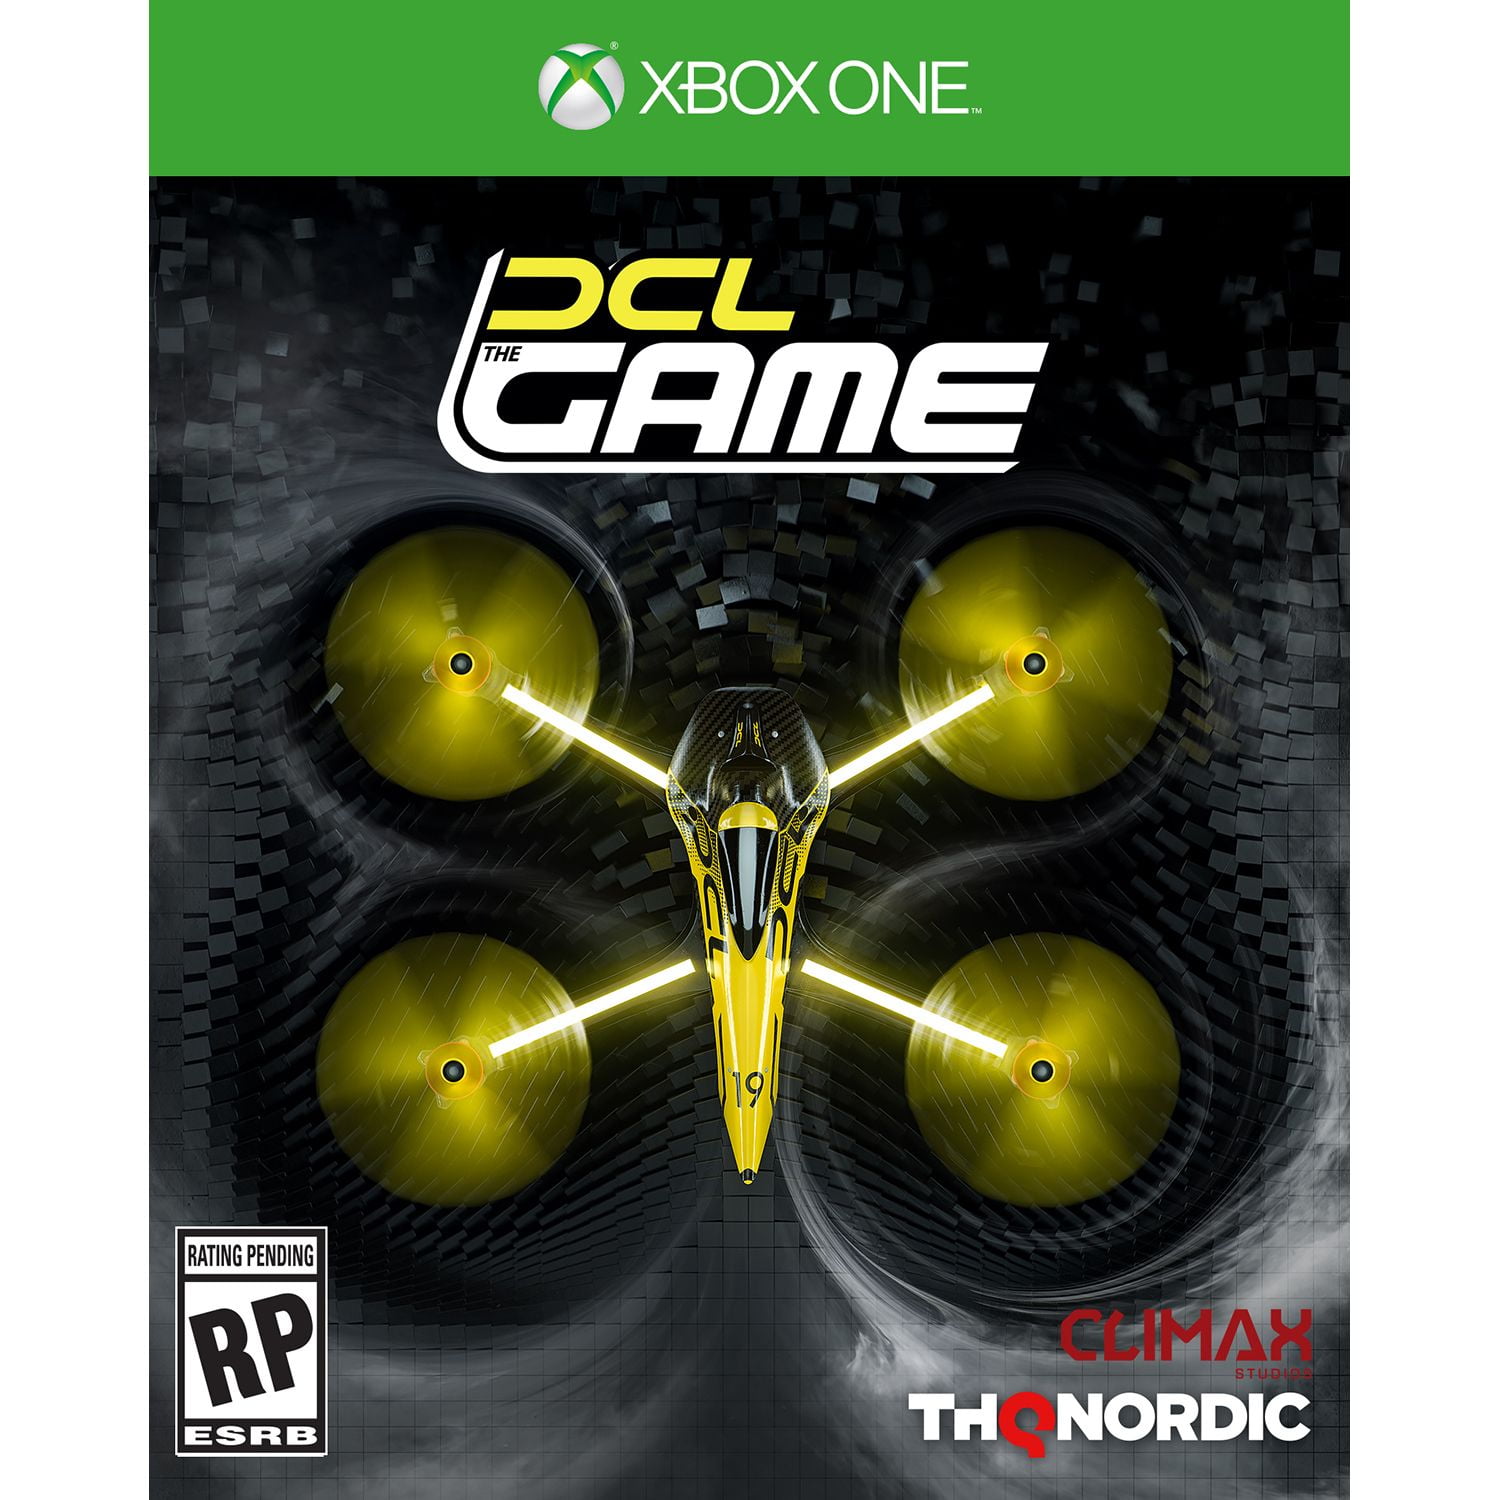 Dcl Drone Championship League Thq Nordic Xbox One 811994022455